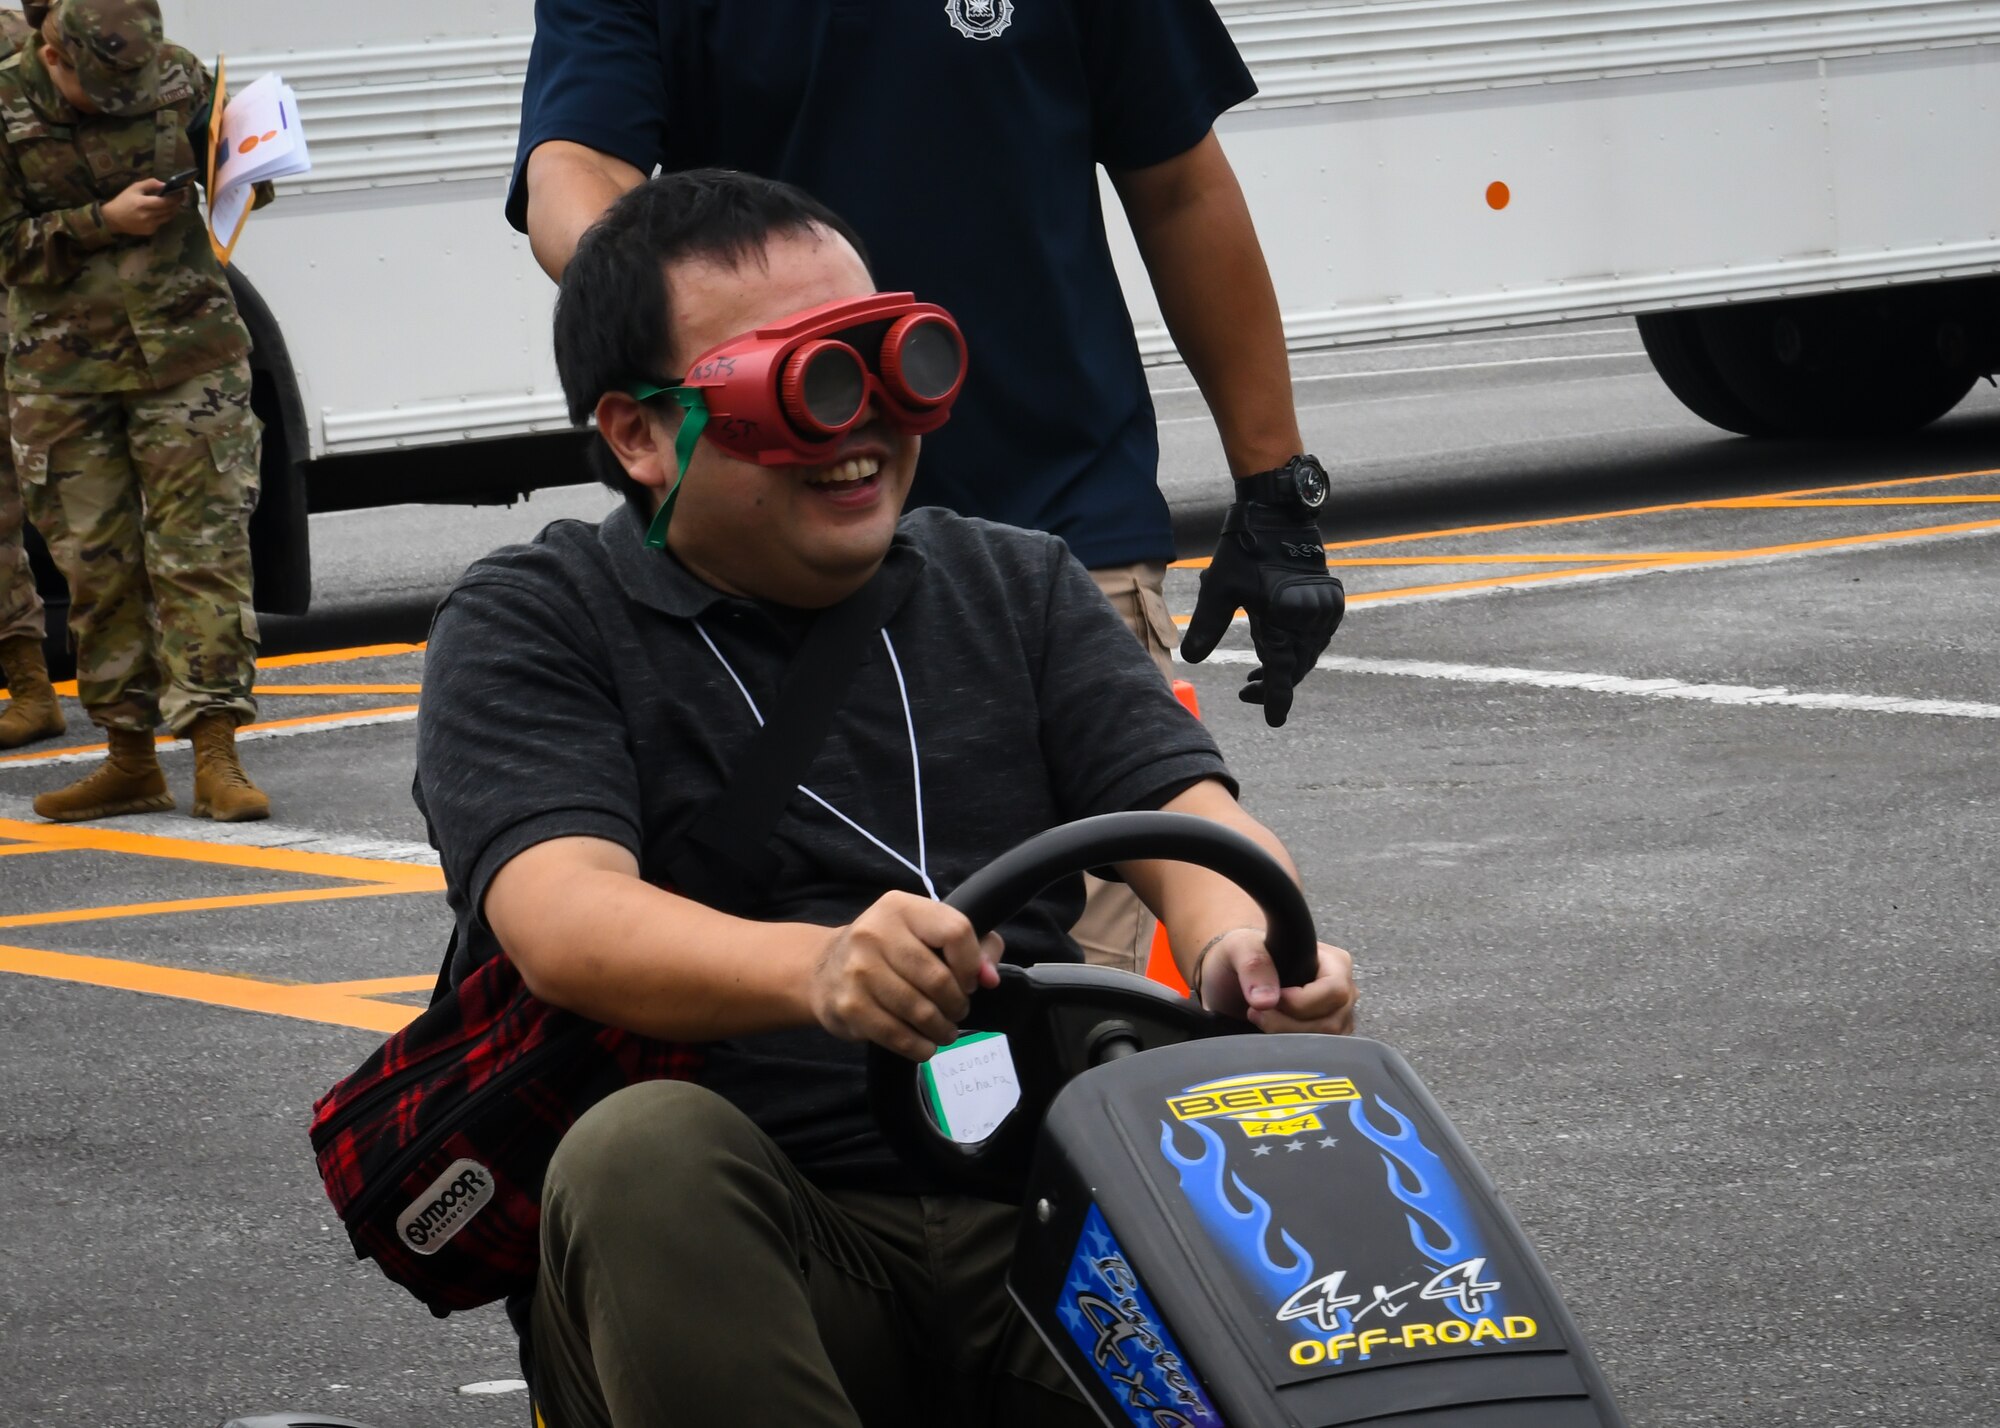 Kazunori Uehara, Twitter Tour visitor, drives a go-cart while wearing drunk goggles during a drunken driving prevention demonstration at Kadena Air Base, Japan, Nov. 4, 2019. Visitors were selected based on when they subscribed to the 18th Wing Twitter page and a brief application process. (U.S. Air Force photo by Staff Sgt. Benjamin Raughton)